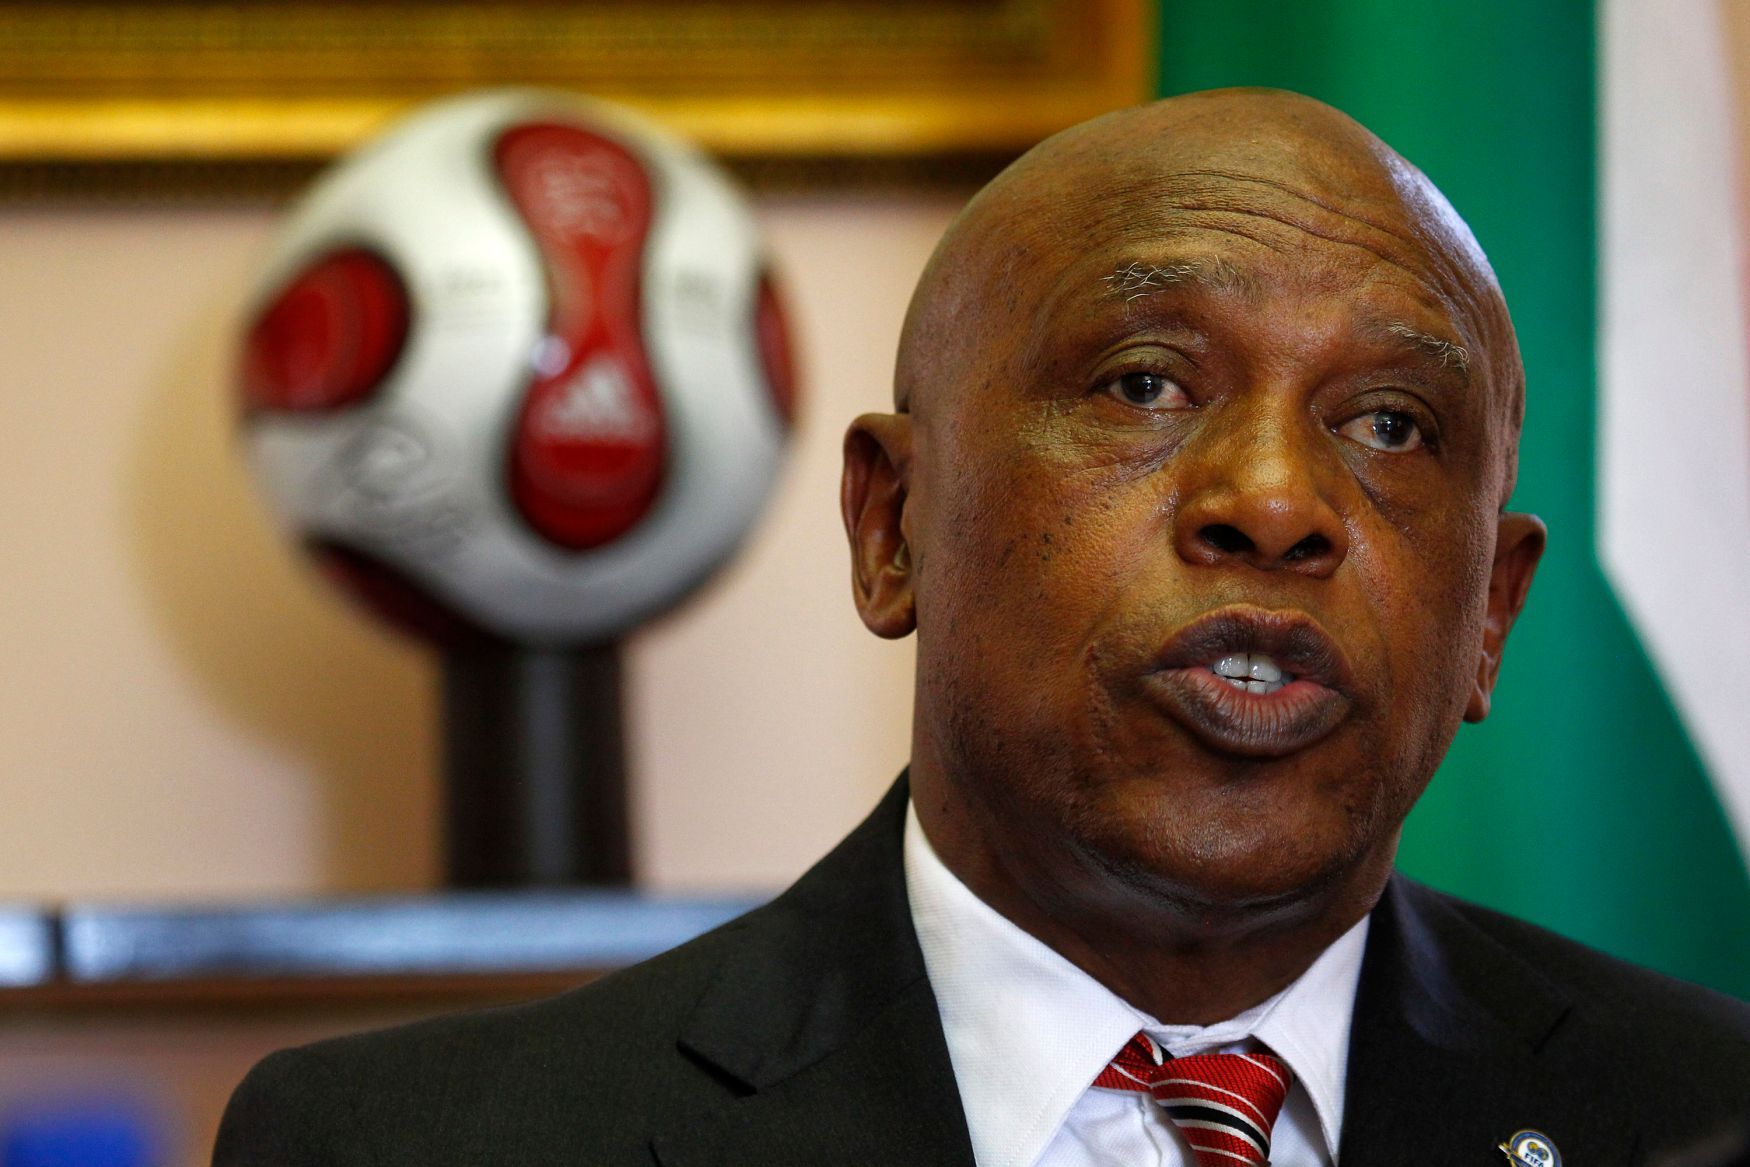 Tokyo Sexwale - South African Minister of Human Settlements and FIFA member